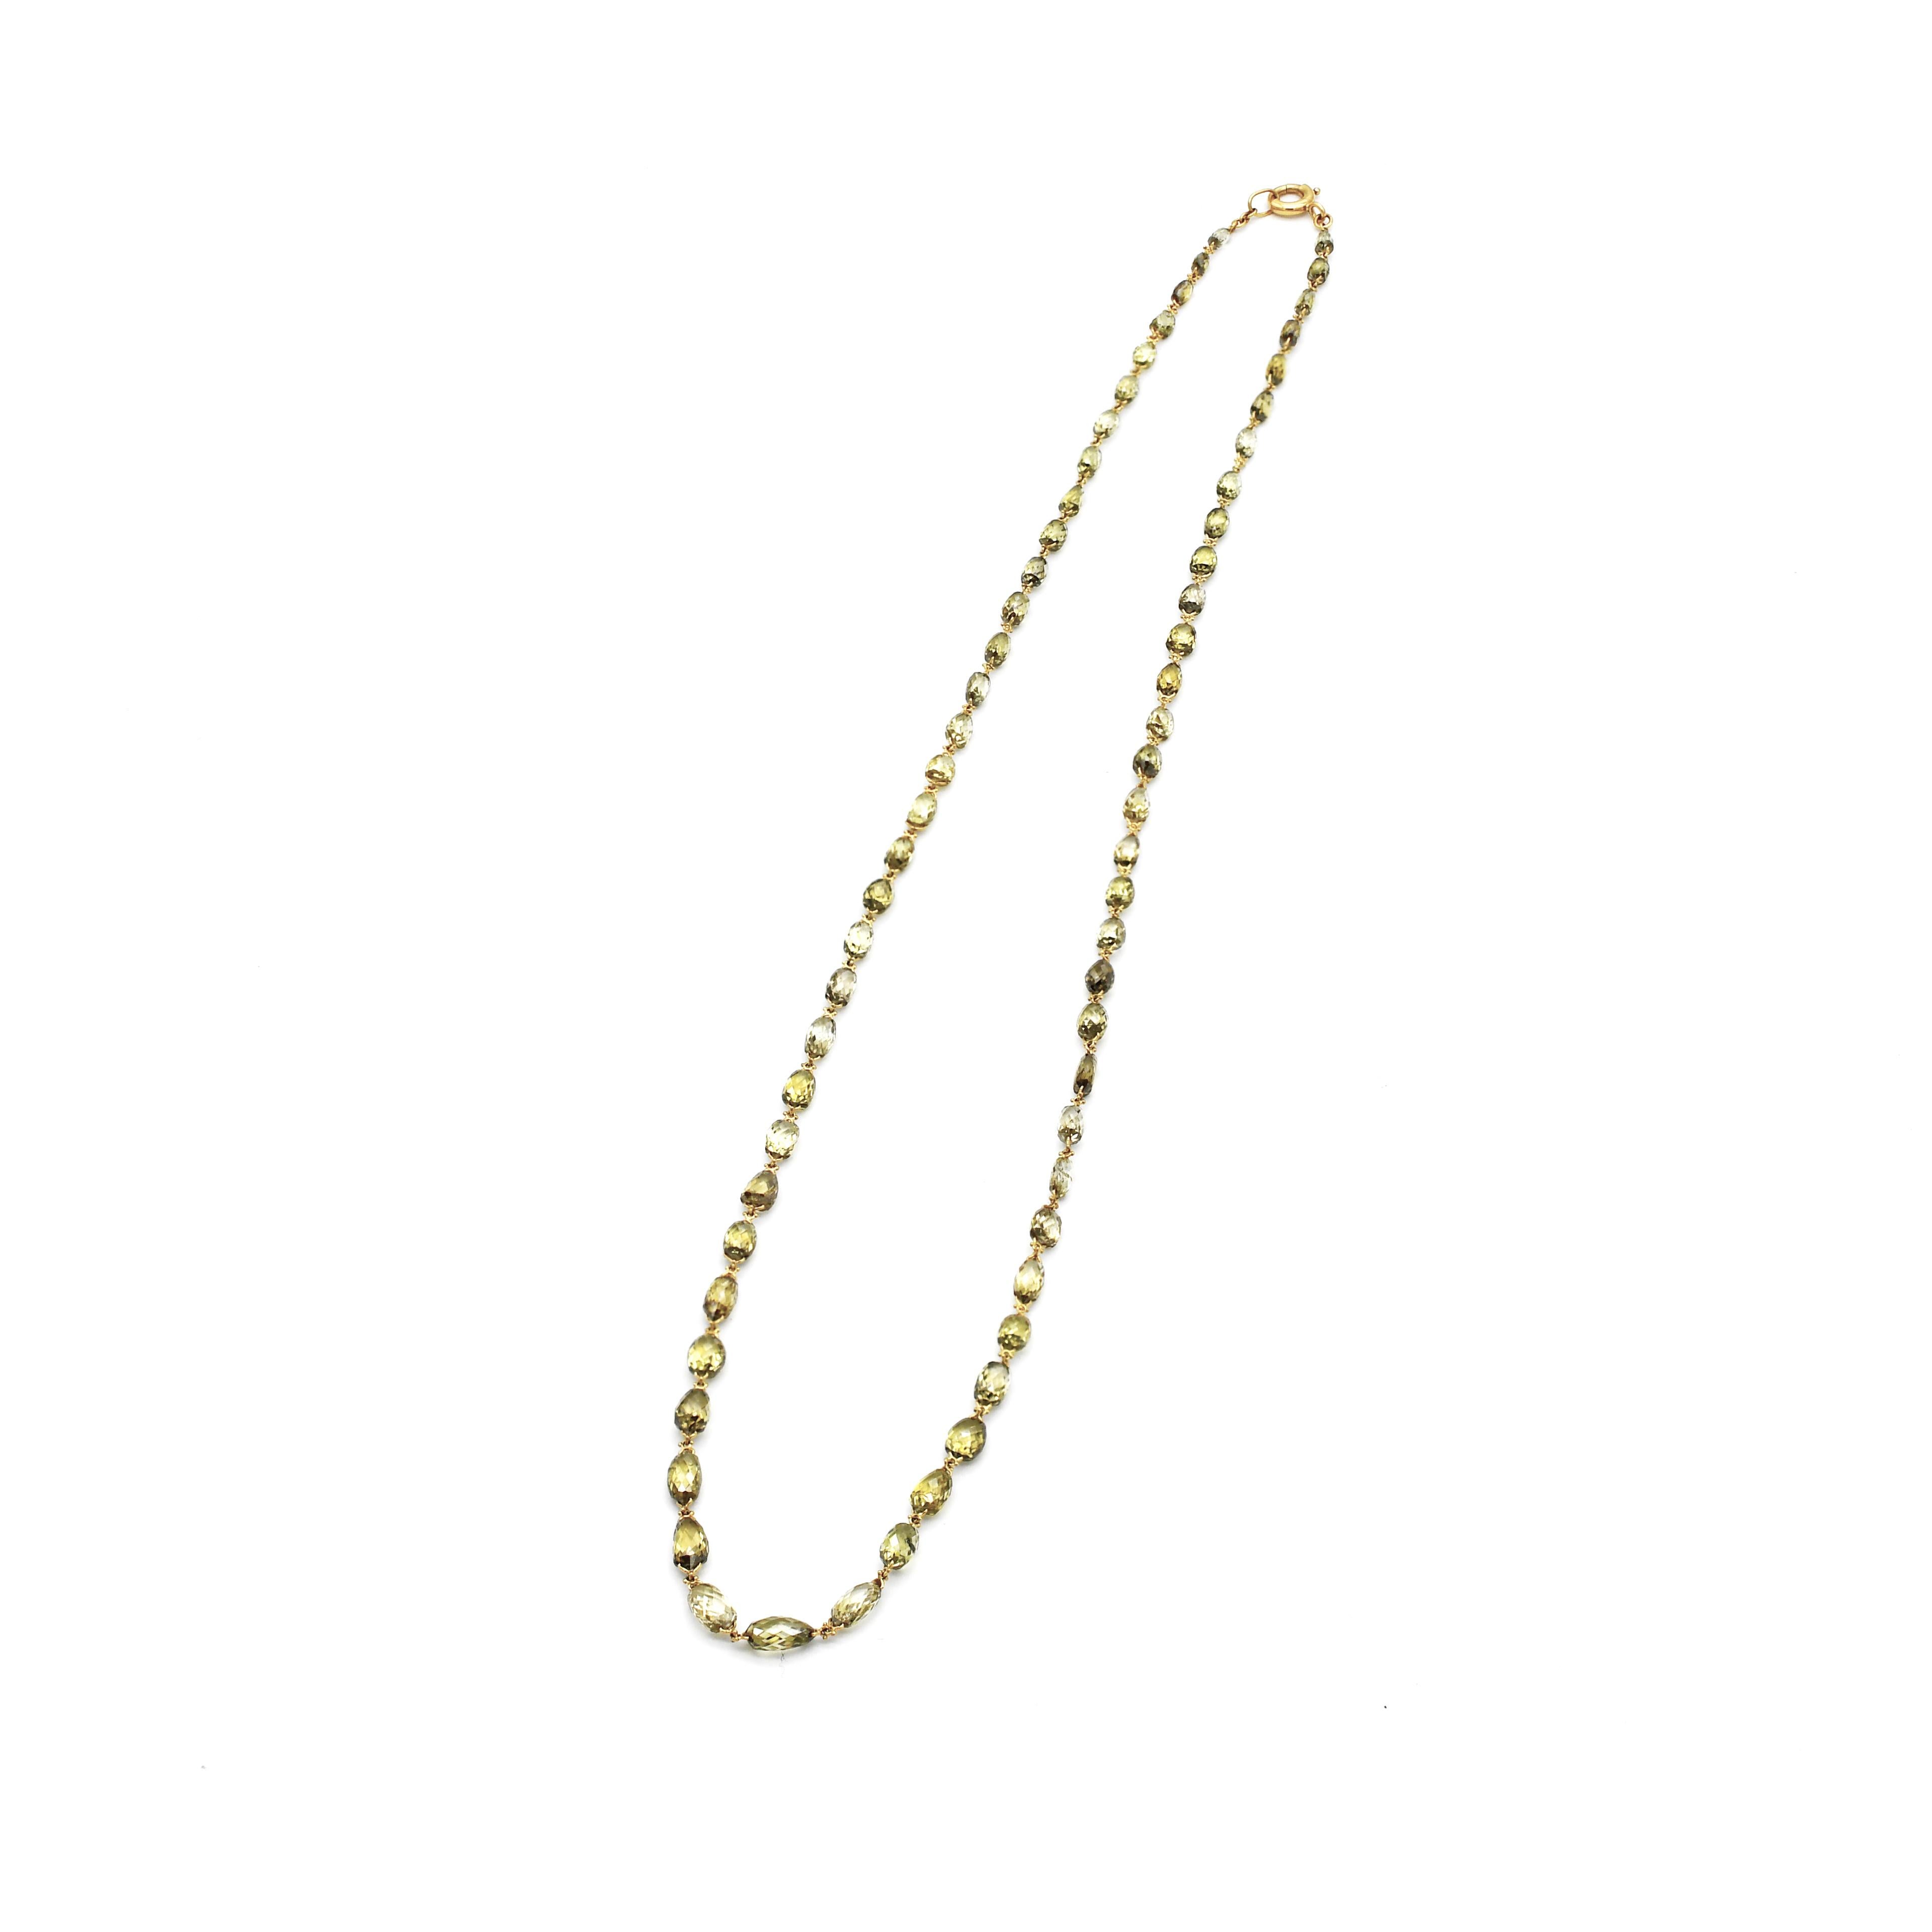 Natural Olive Green Diamond Briollette Chain Necklace in 18 Karat Gold In New Condition For Sale In Hong Kong, HK